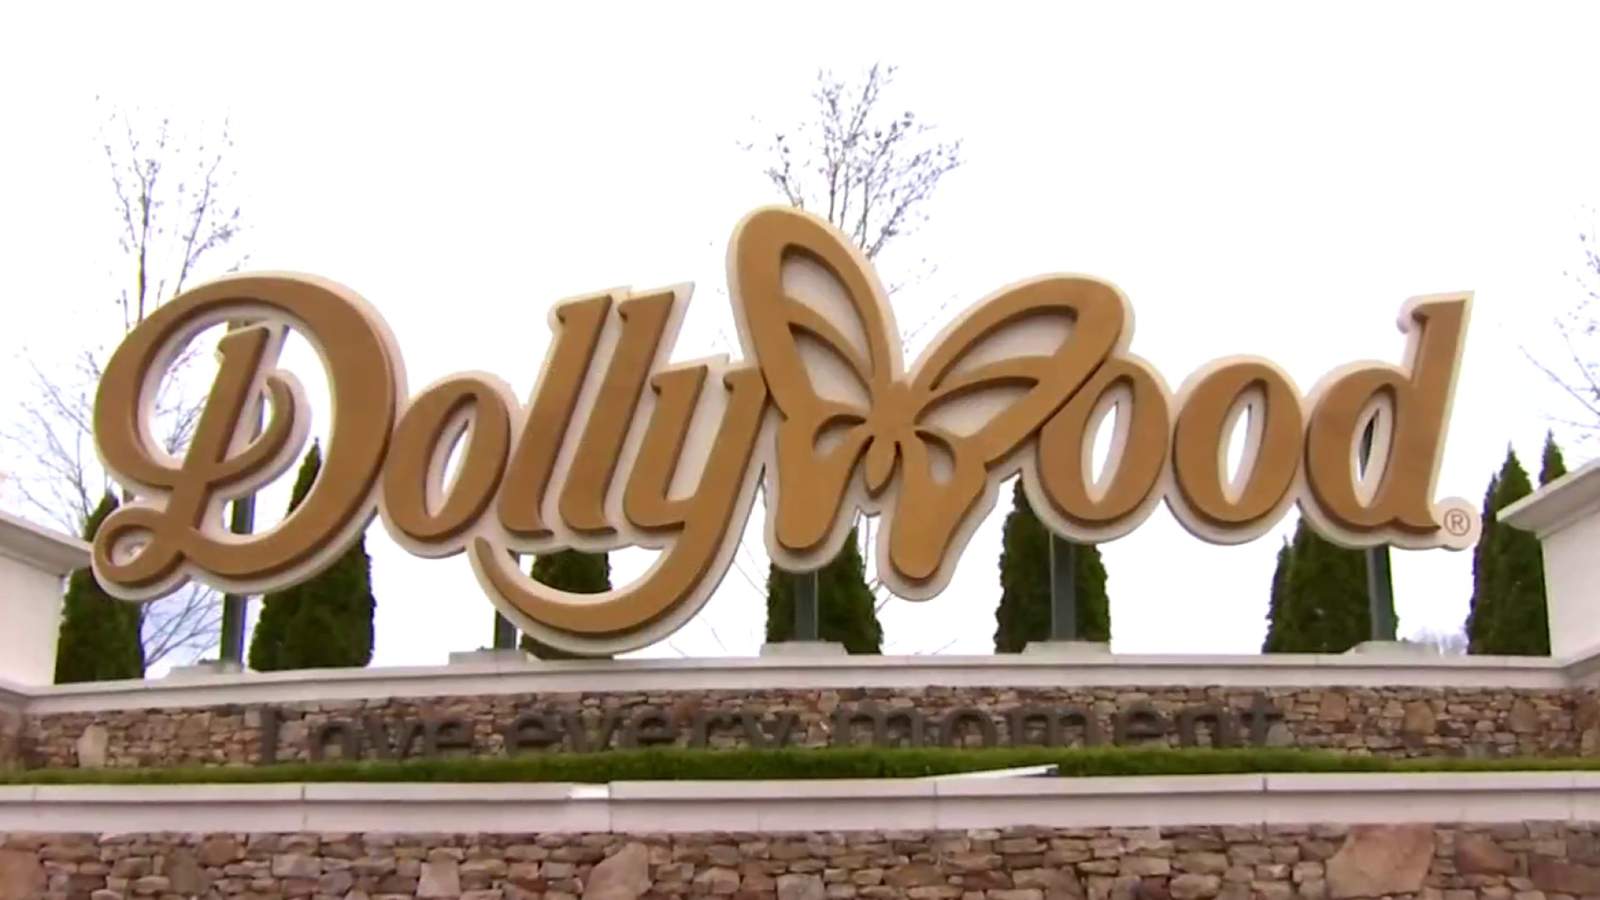 Southwest Virginia visitors are 10th highest in attendance at Dollywood